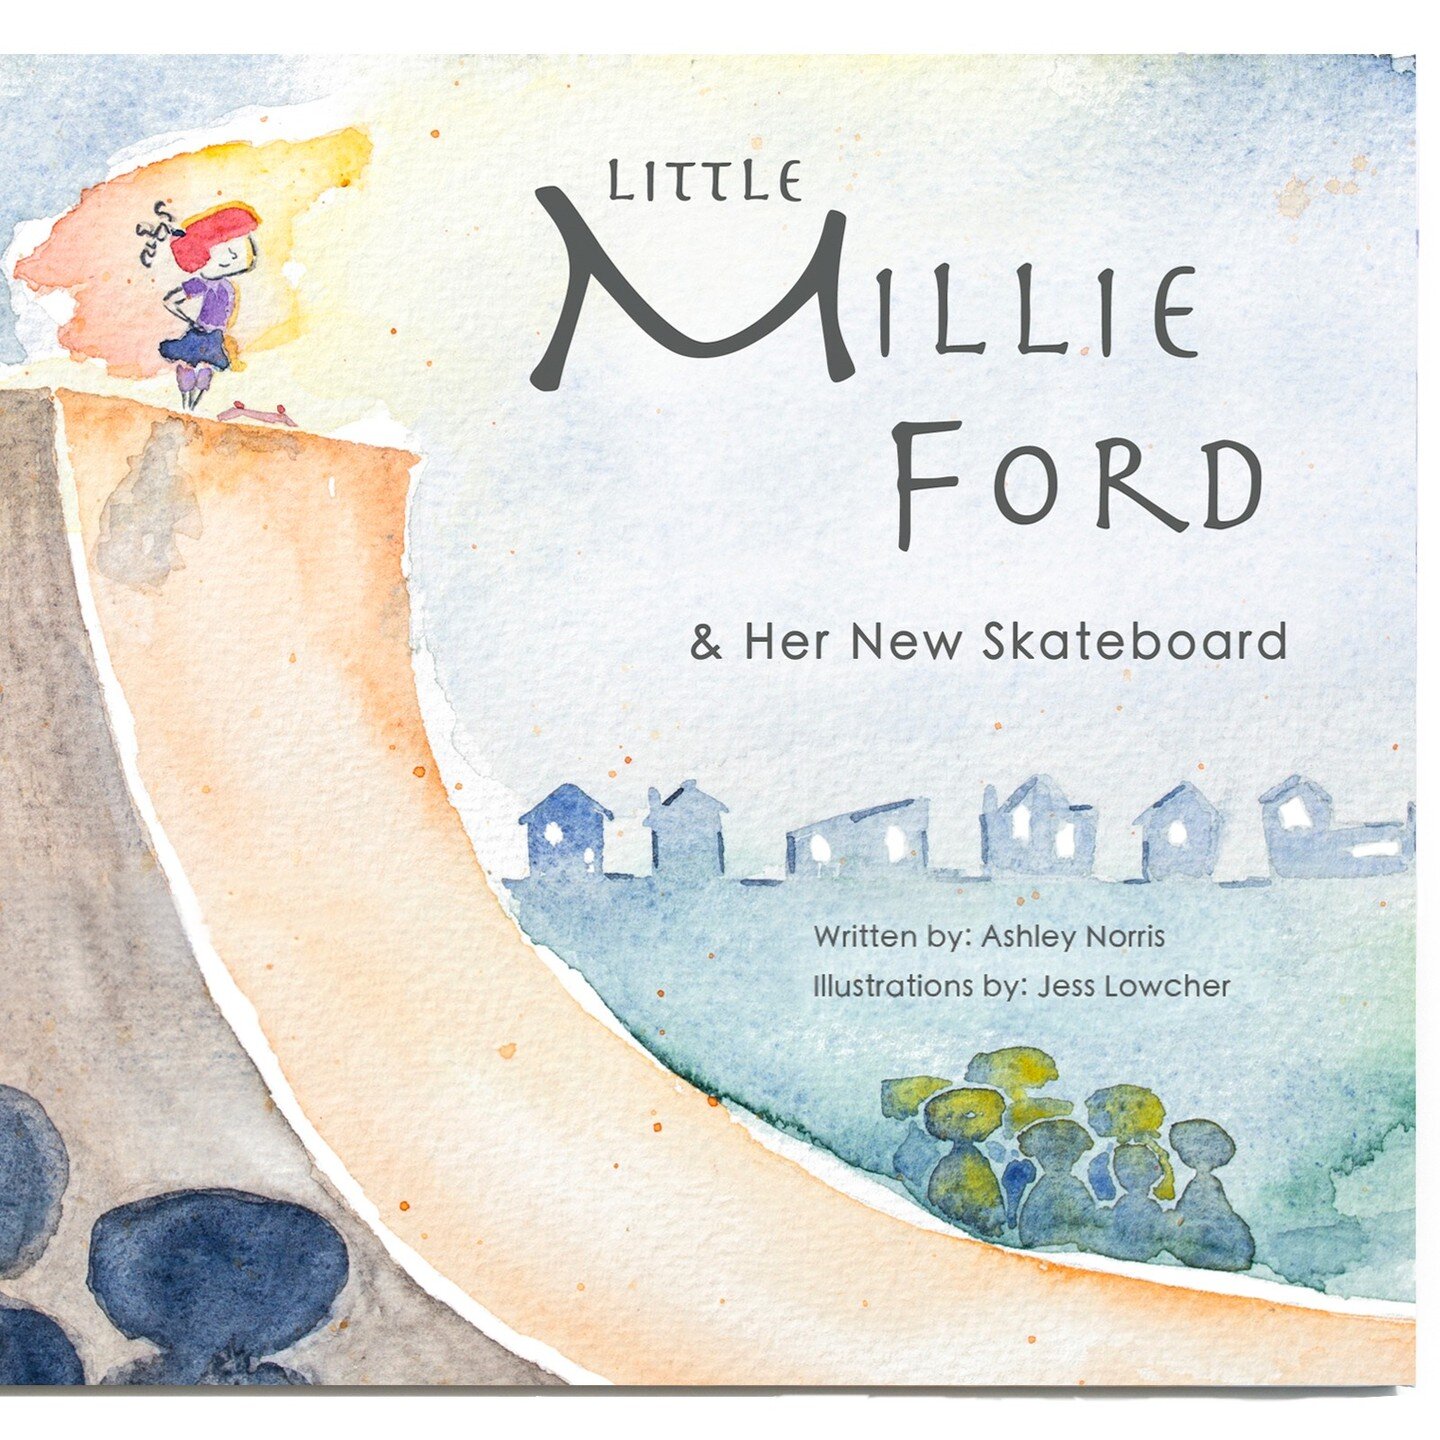 September is back to school month! 

Empower your young kids with these two amazing books.

BUY ONE GET SECOND BOOK 50% off. Use the discount code below: 

SCHOOLDAYS

#skateboardingforgirls
#surfingforgirls
#milliefordandhernewskateboard #queeniewah